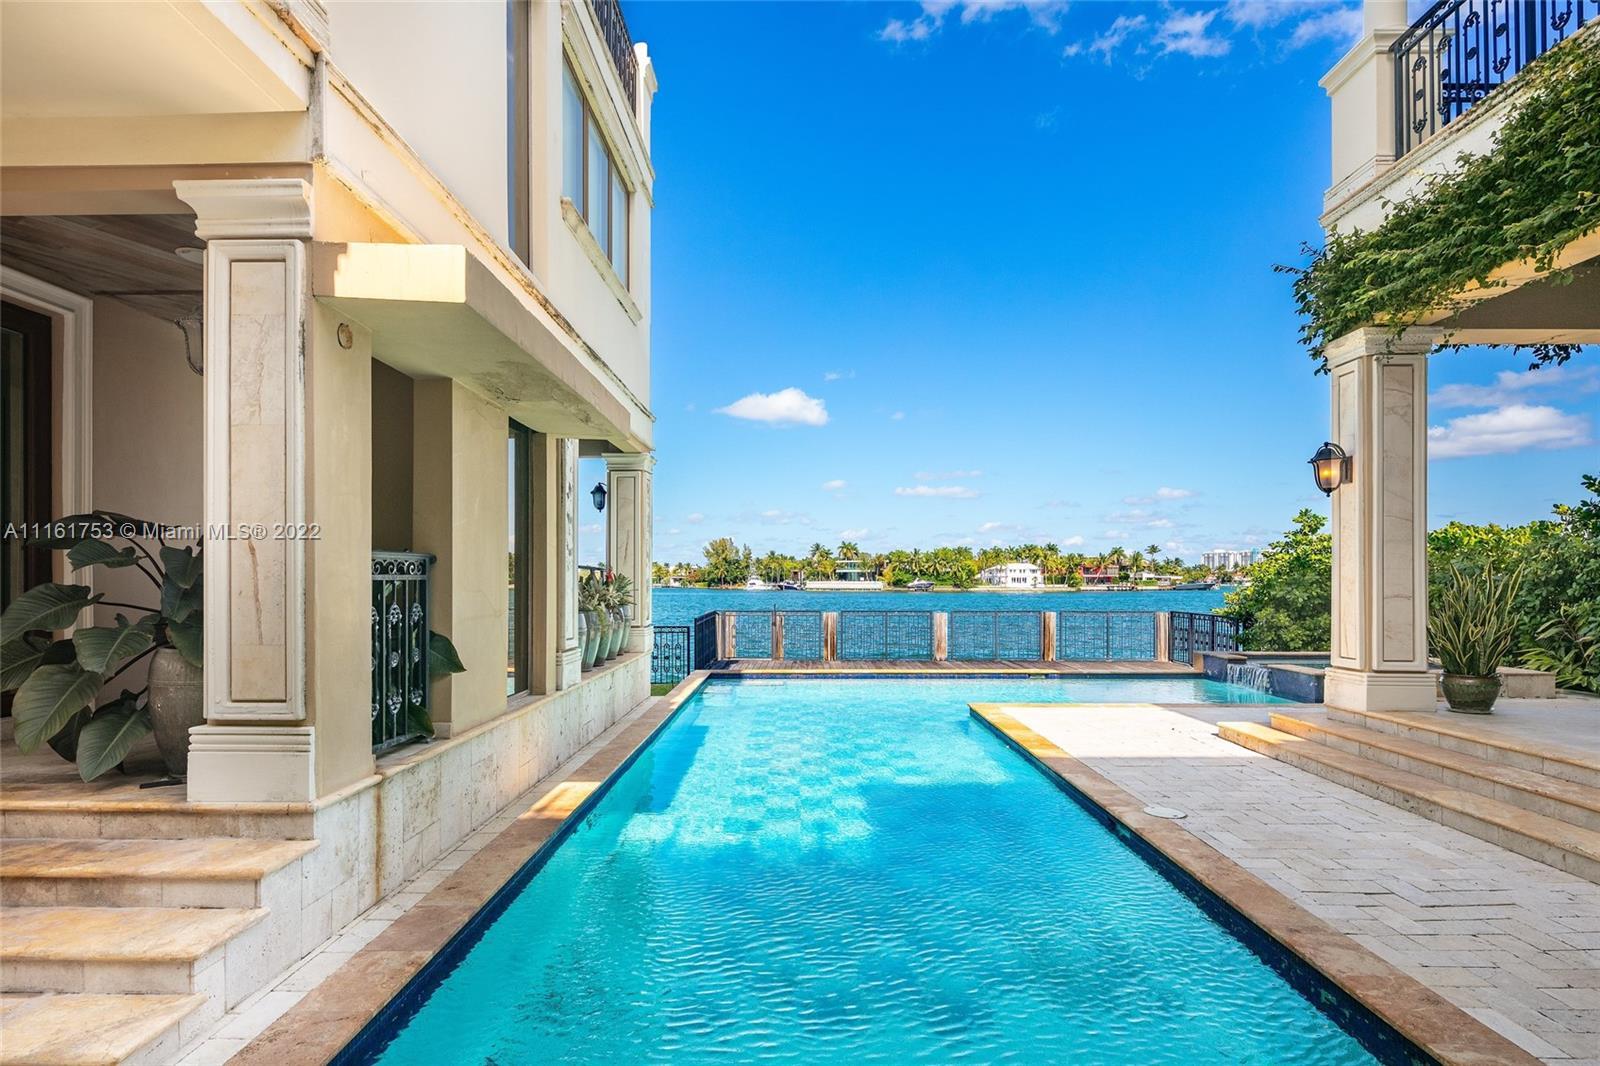 Enjoy waterfront living overlooking the waters of pristine Biscayne Bay in this 3-story private, gat